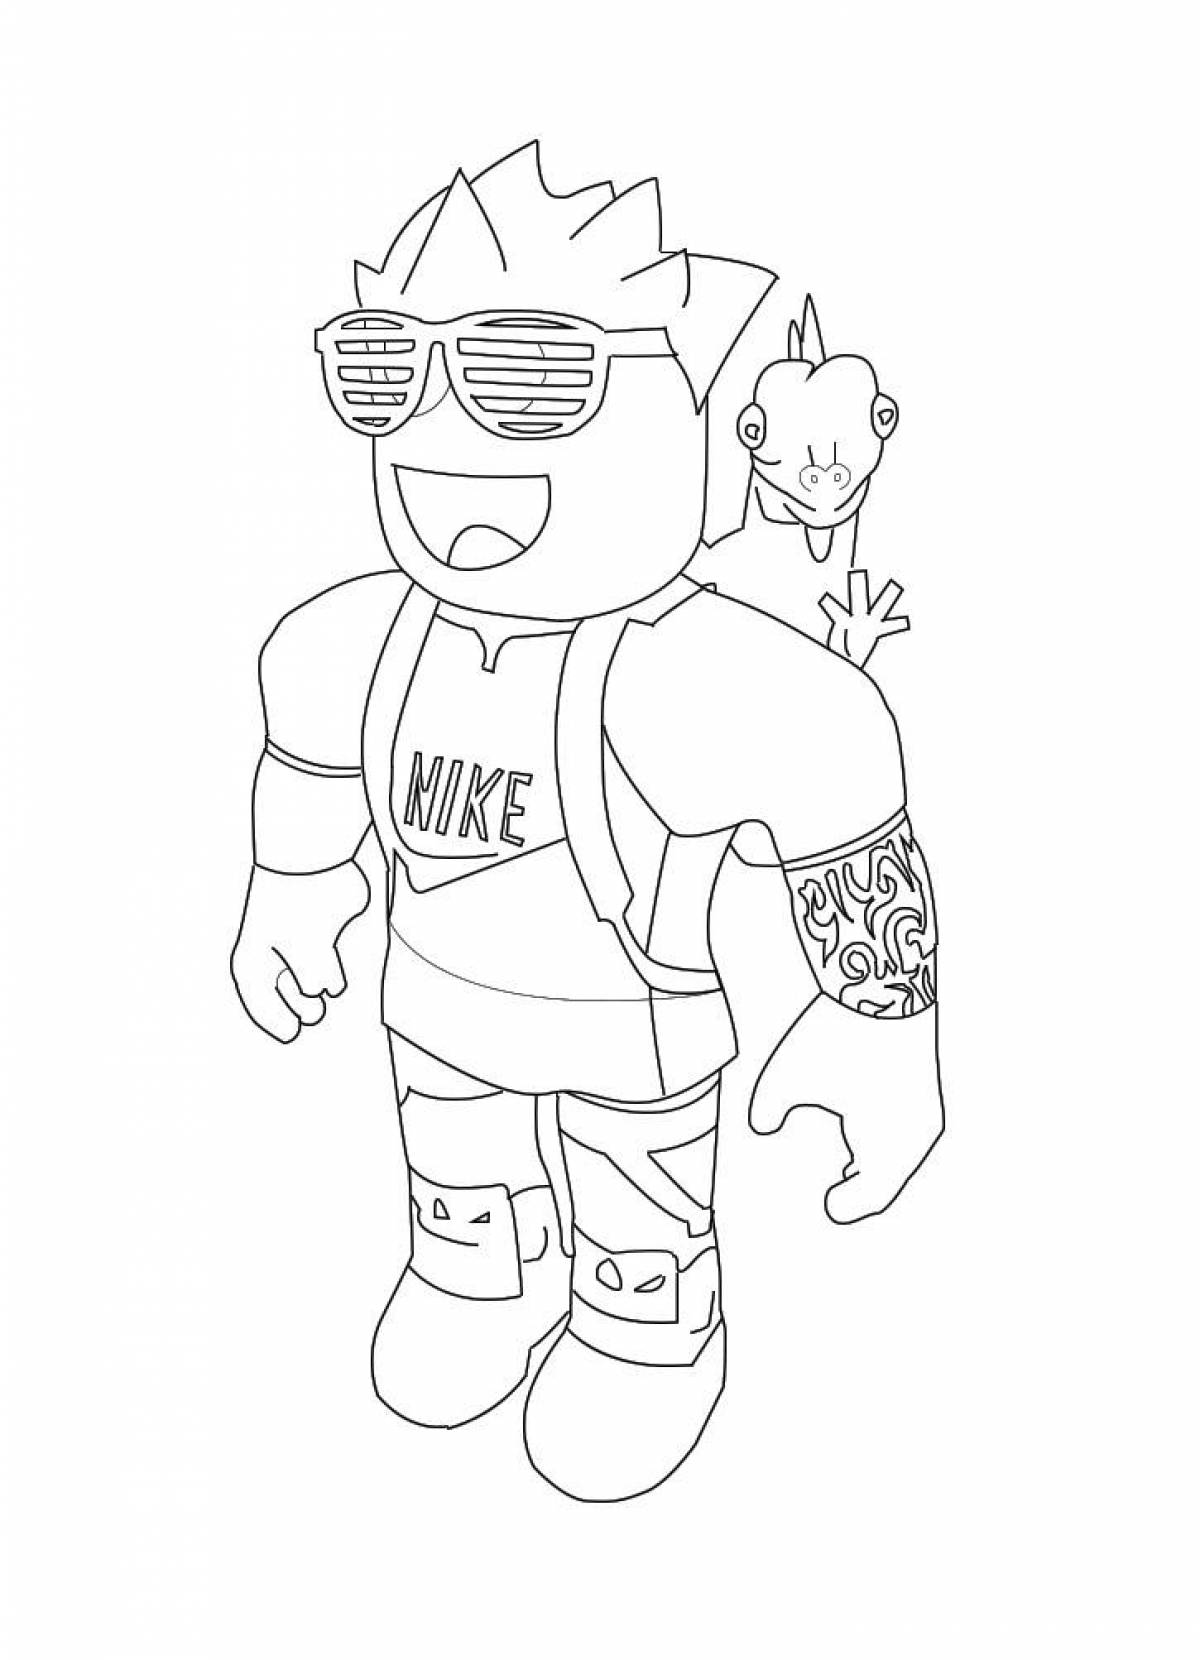 Colorful roblox coloring page for kids